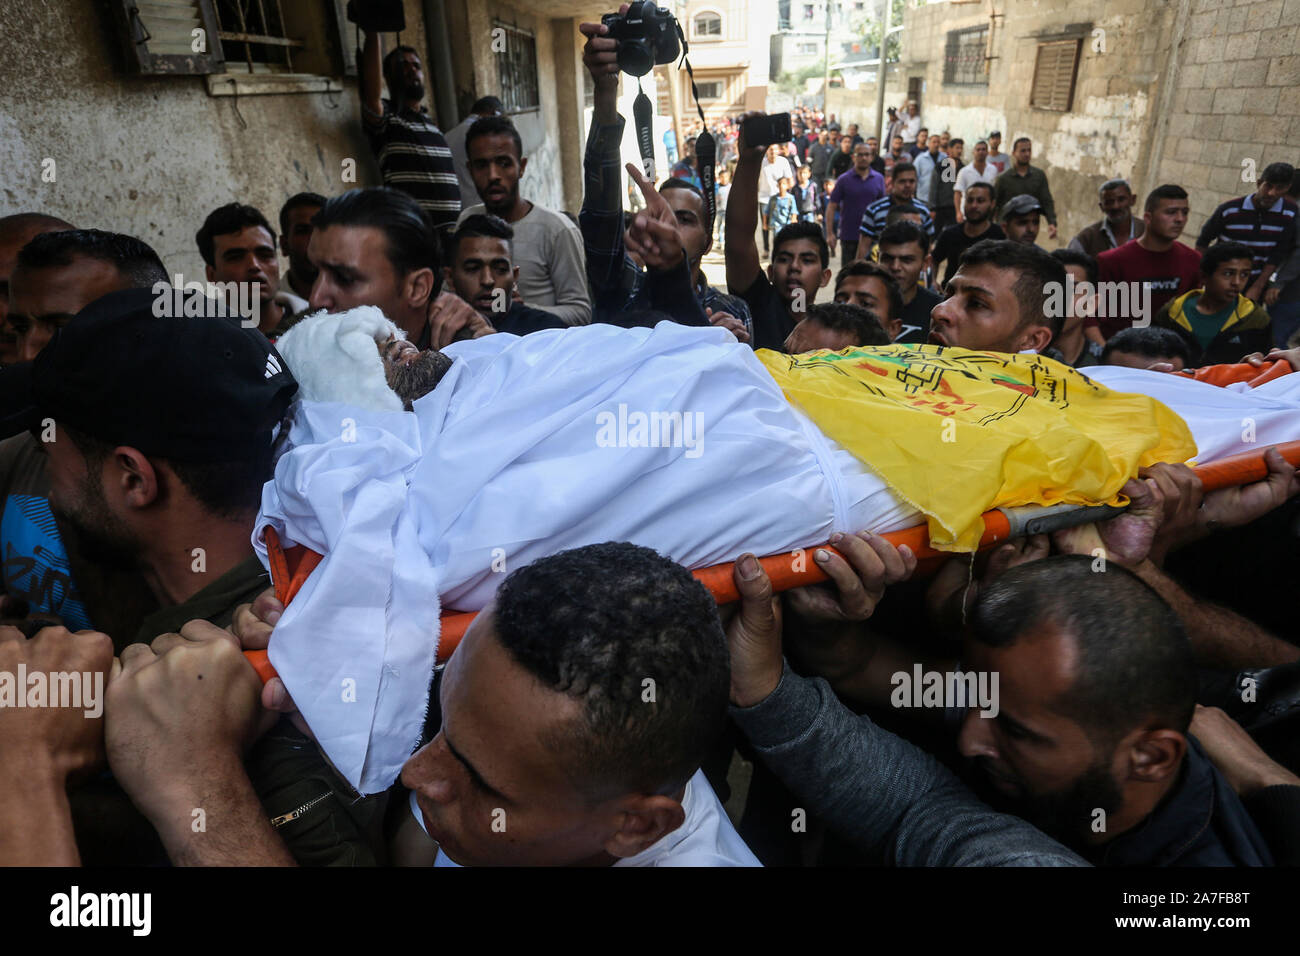 Relatives of Palestinian Ahmed Al-Shahri, 27, mourn during his funeral in the southern Gaza Strip. Nov 02, 2019. Photo by Abed Rahim Khatib/Alamy Stock Photo